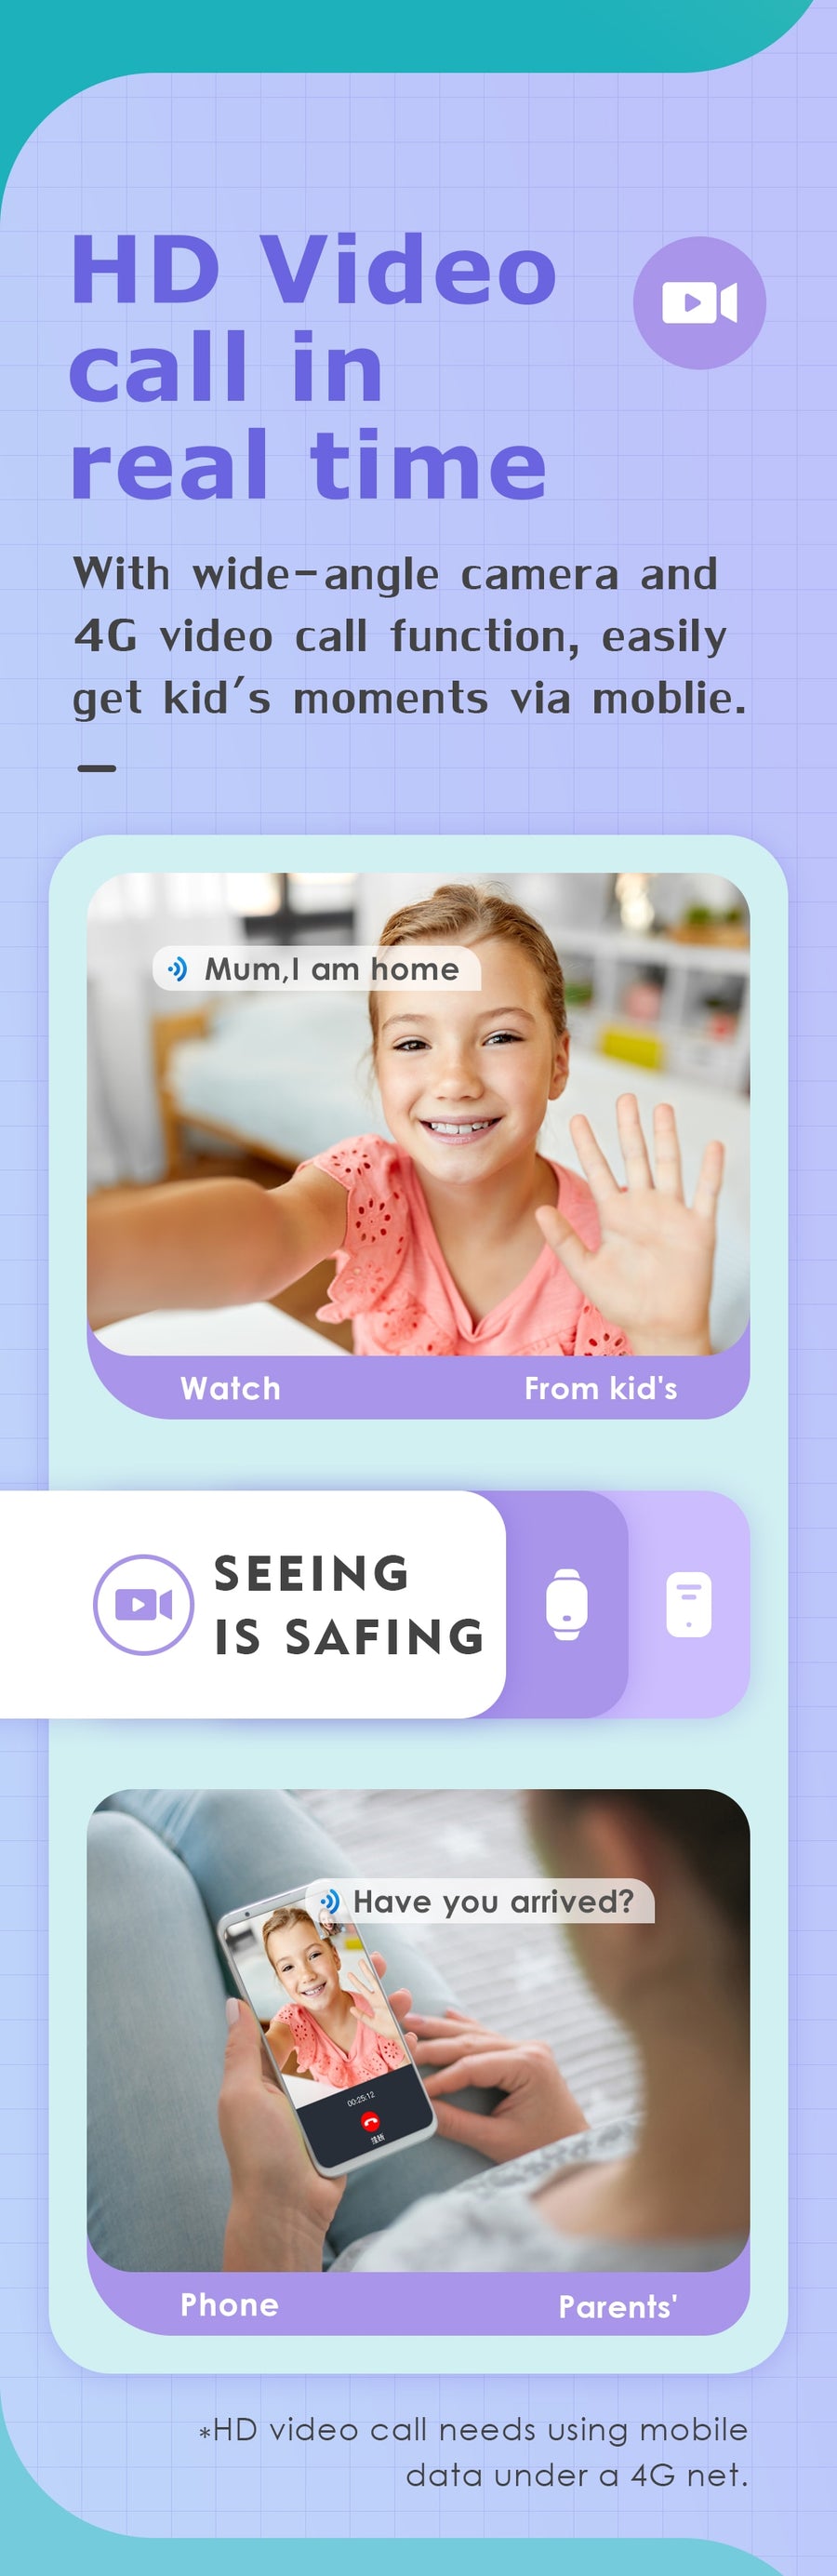 Smart Watch With GPS & WIFI For Kids - Stay Connected and Safe Anytime, Anywhere!